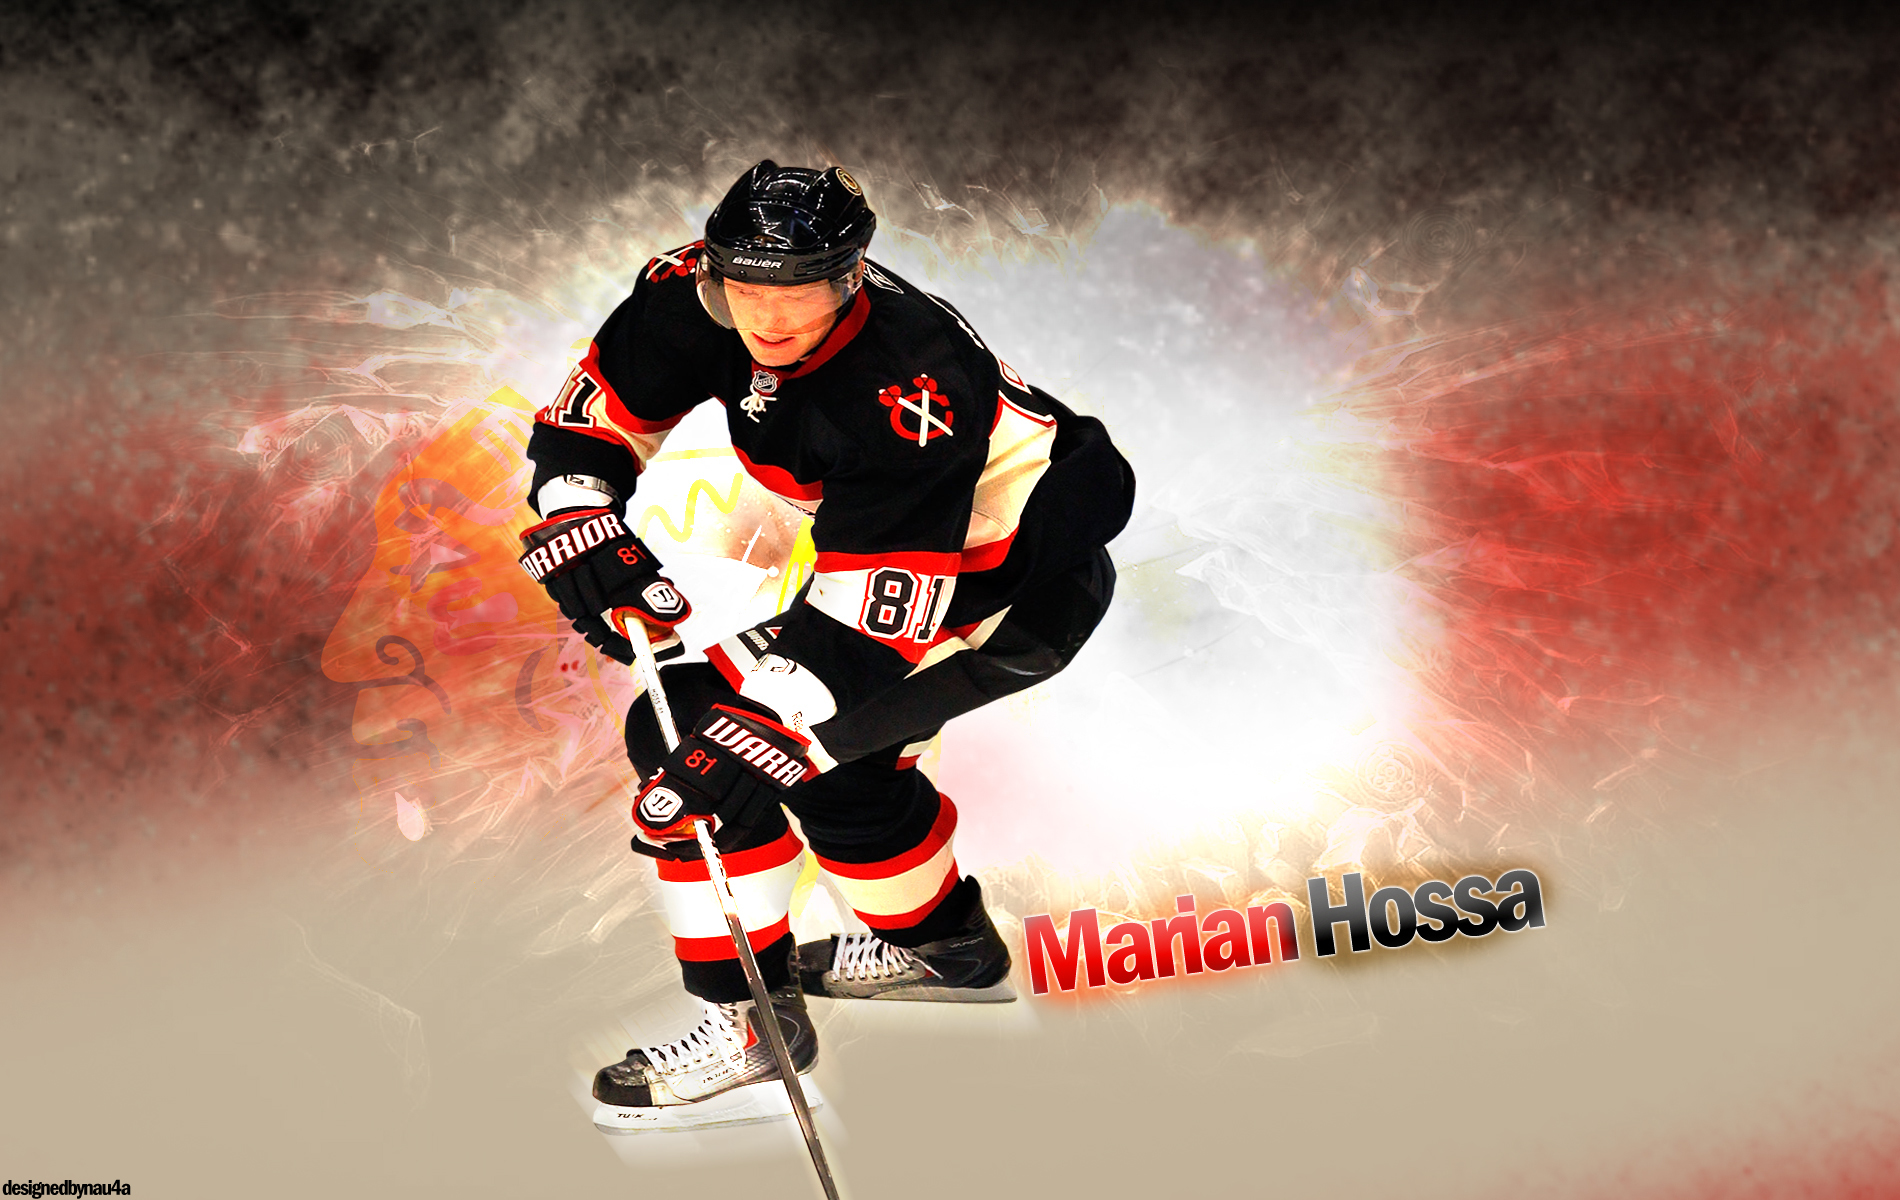 Marian Hossa wallpaper and image, picture, photo